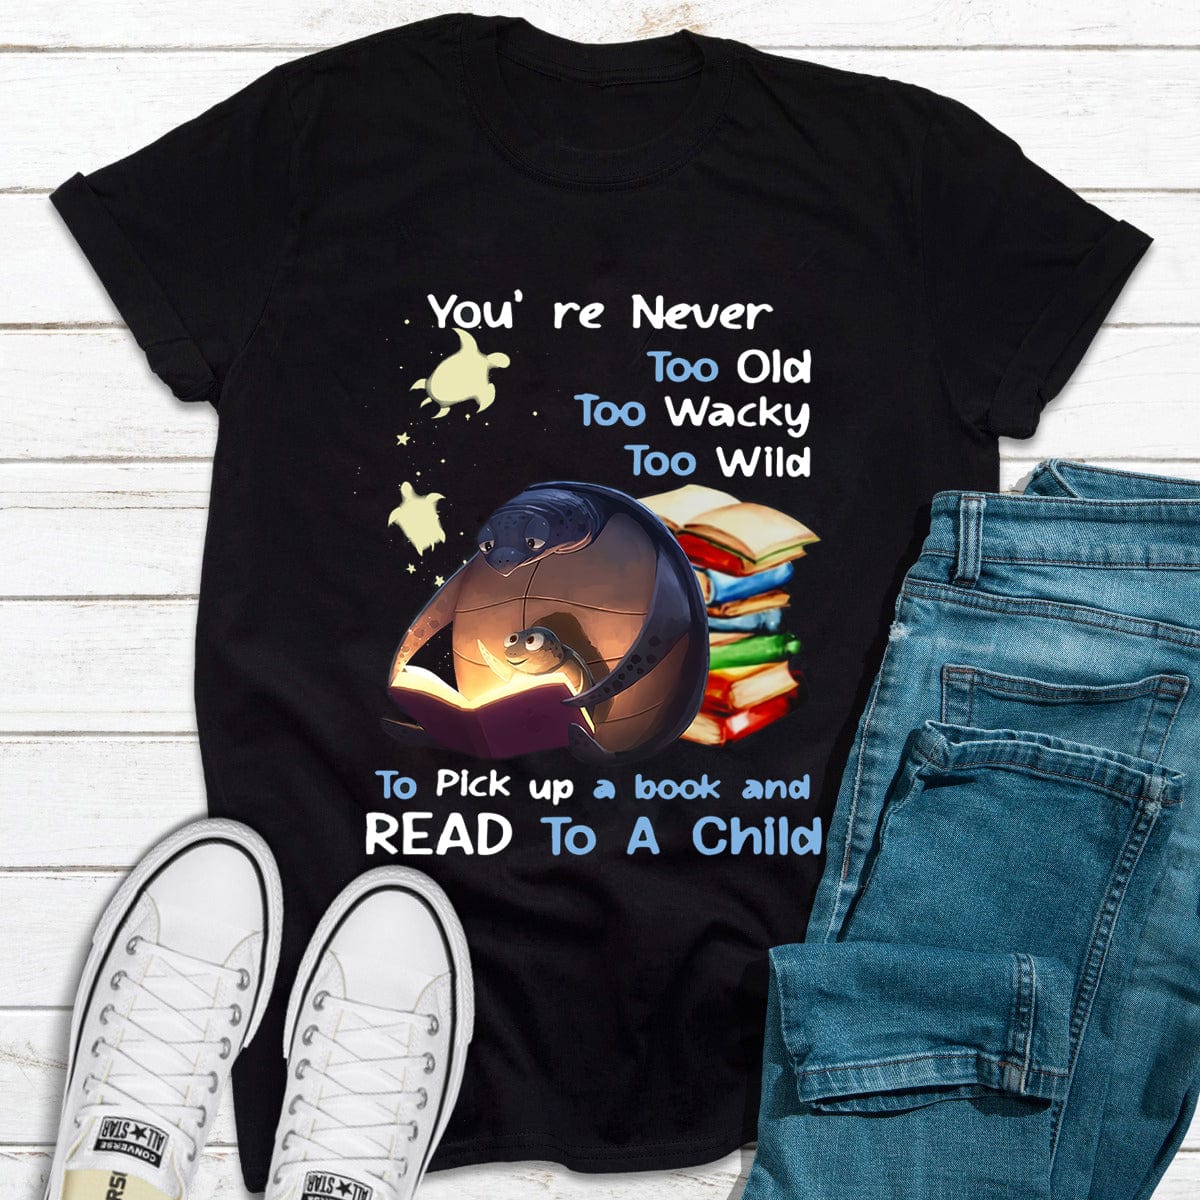 You're Never Too Old To Read To A Child Book Shirts